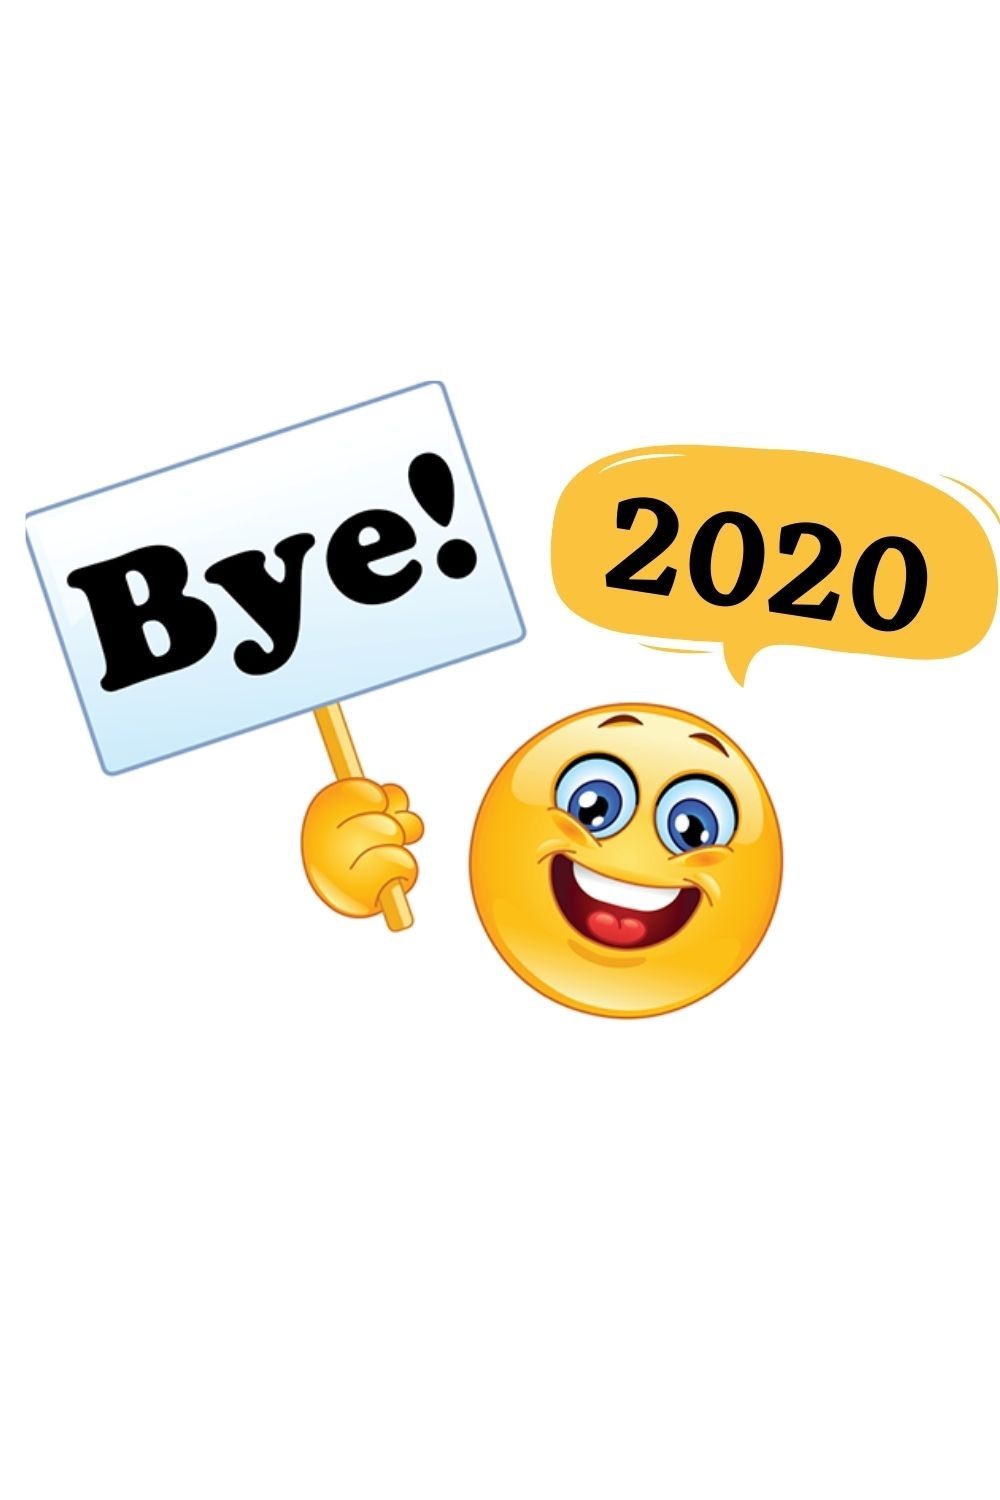 Good Bye 2020 Hello 2021 Wishes & Quotes, Happy New Year 2021 Welcome Status and Messages